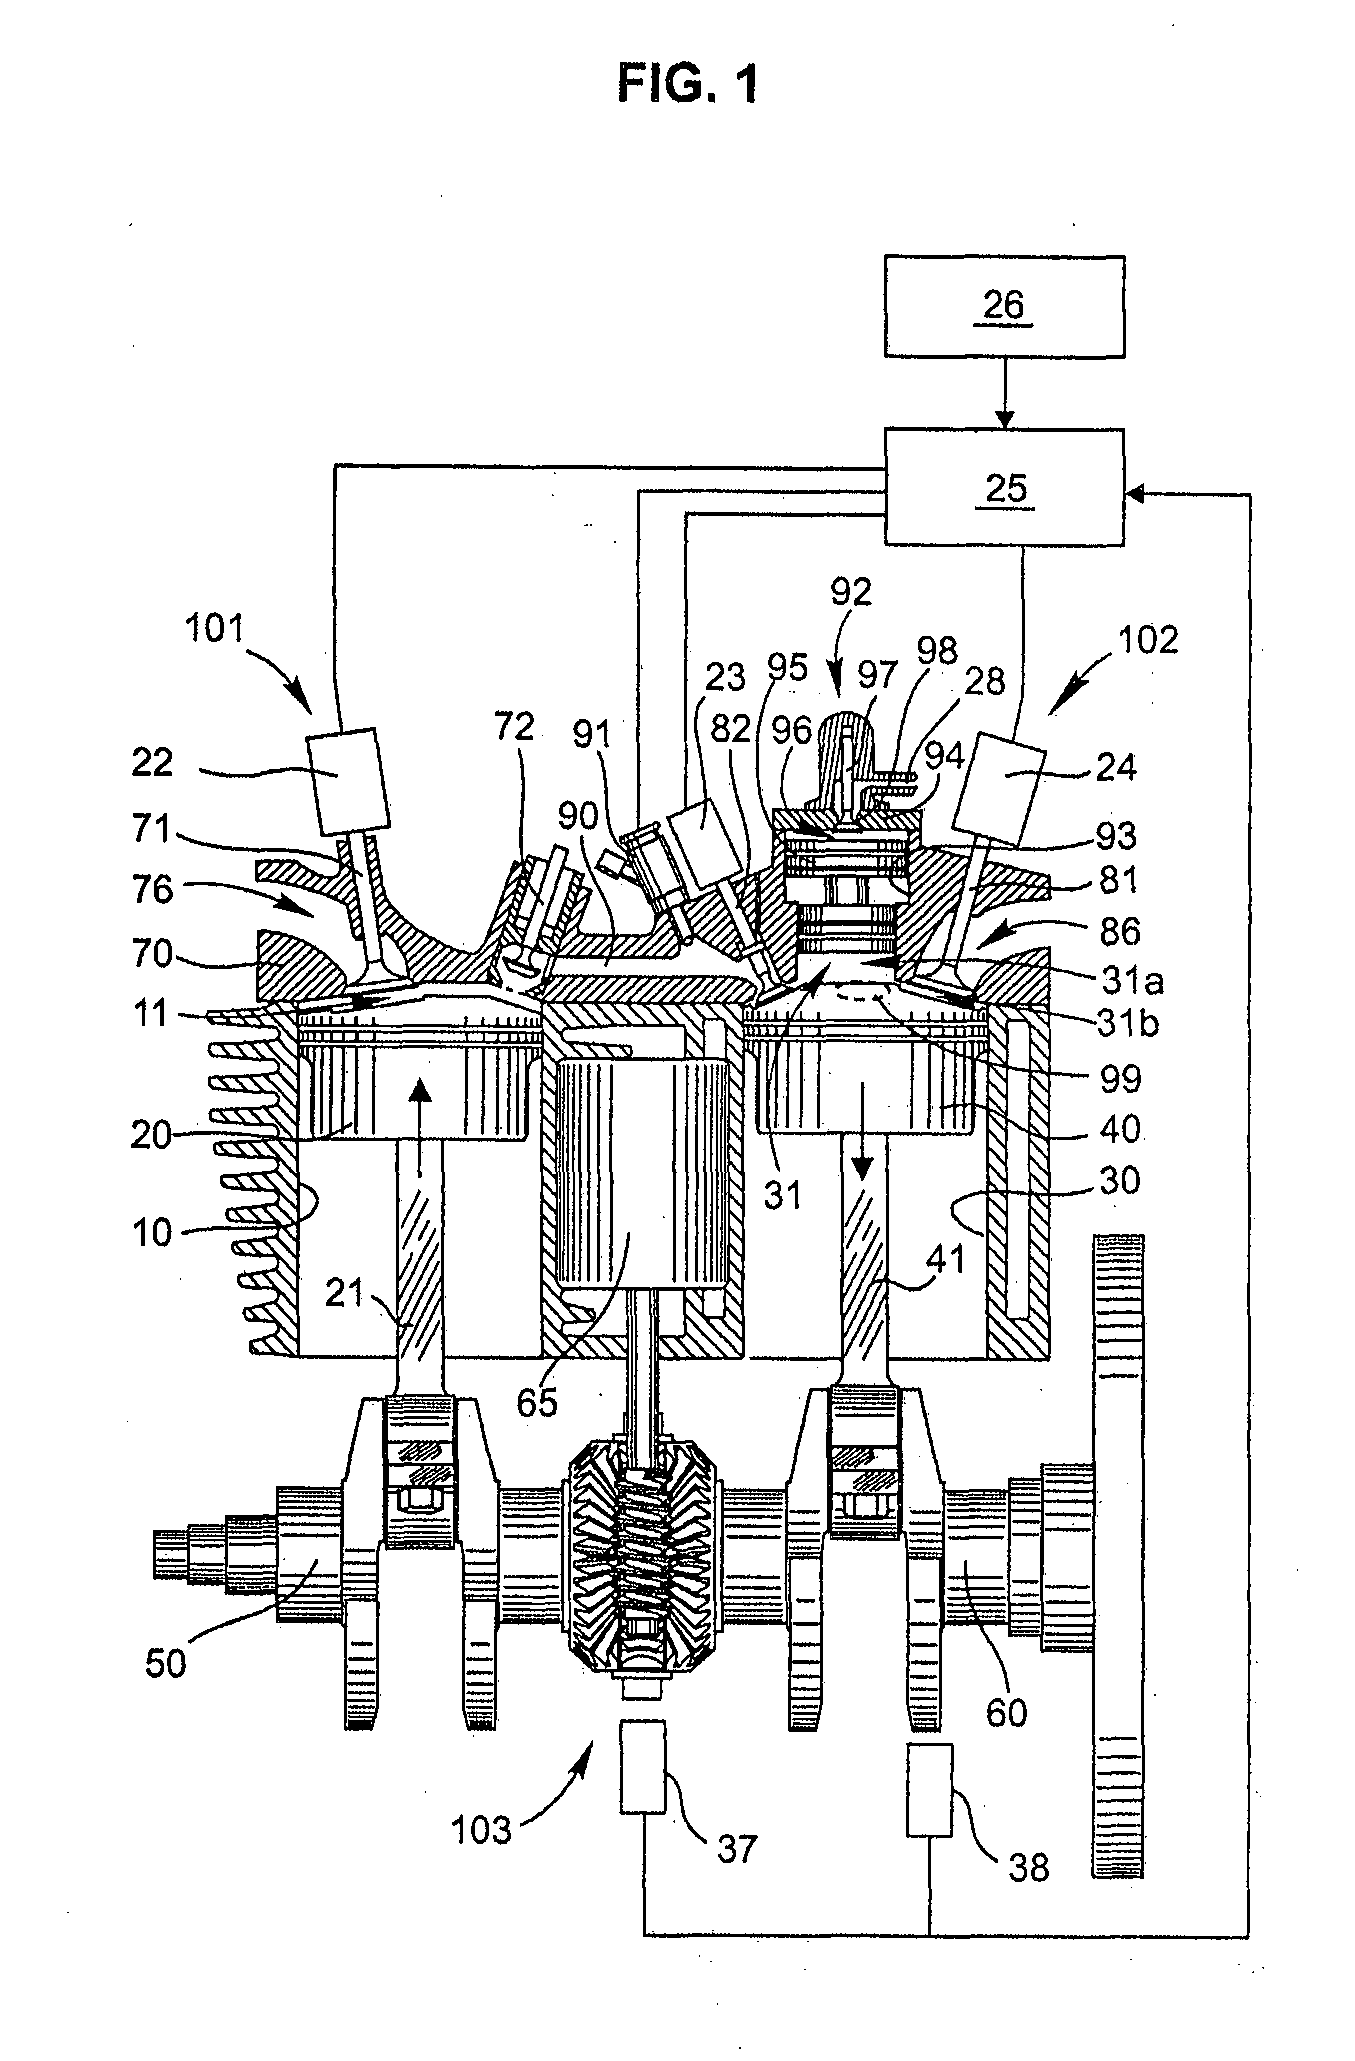 Split Cycle Phase Variable Reciprocating Piston Spark Ignition Engine